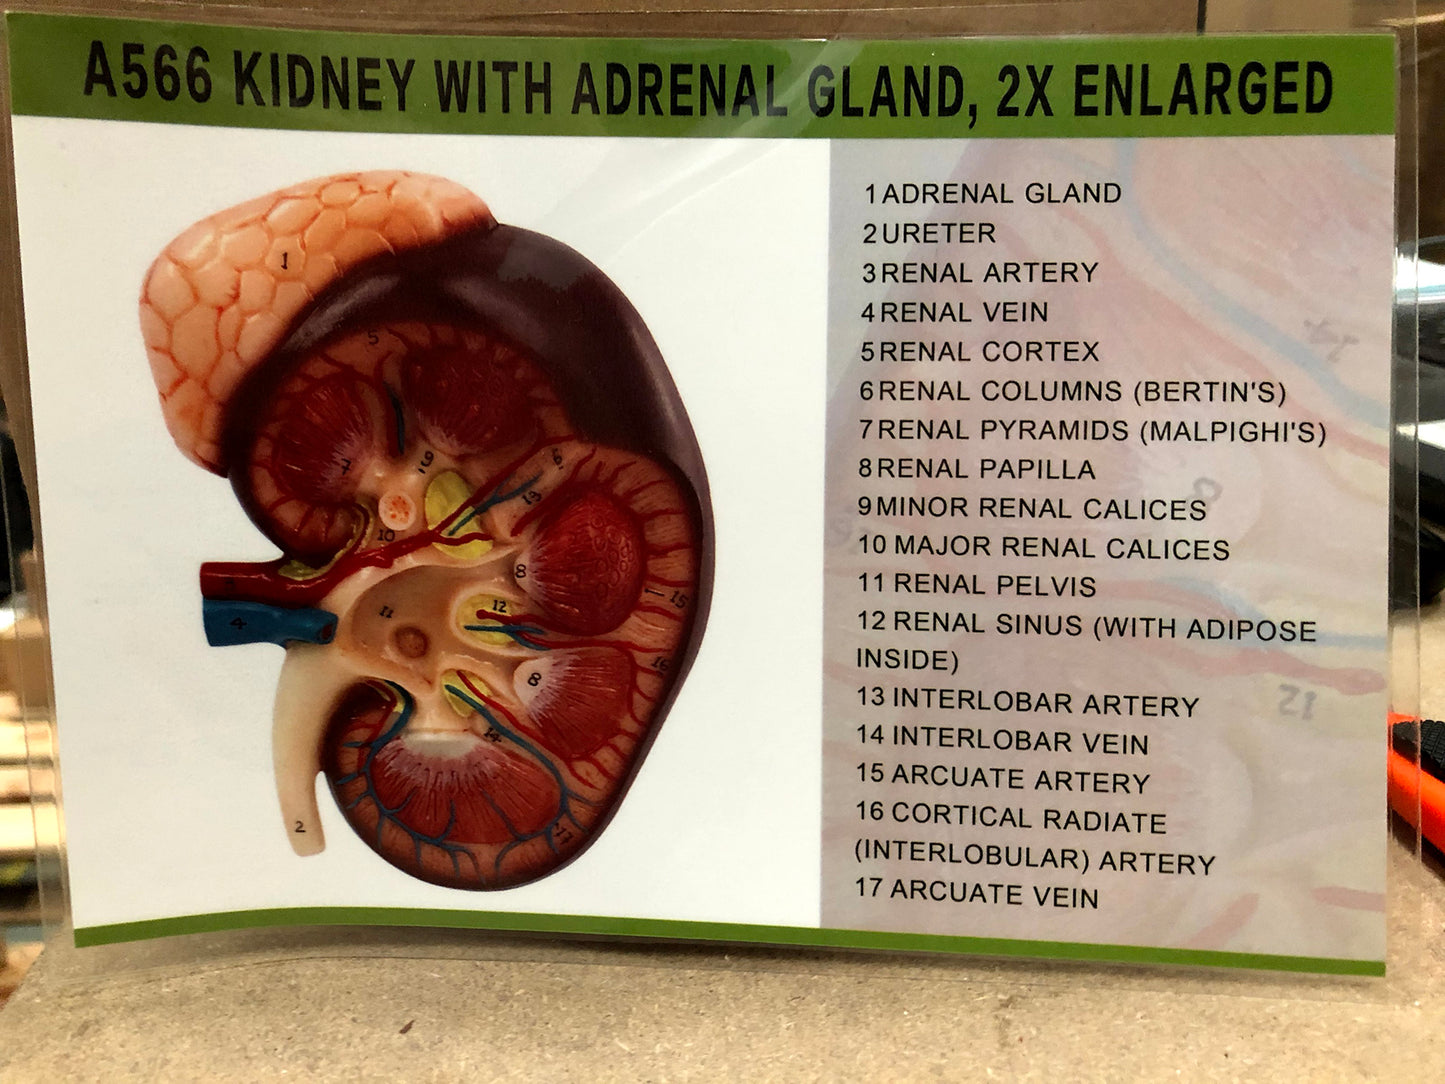 Enlarged kidney model incl. the adrenal gland showing a longitudinal section of the kidney